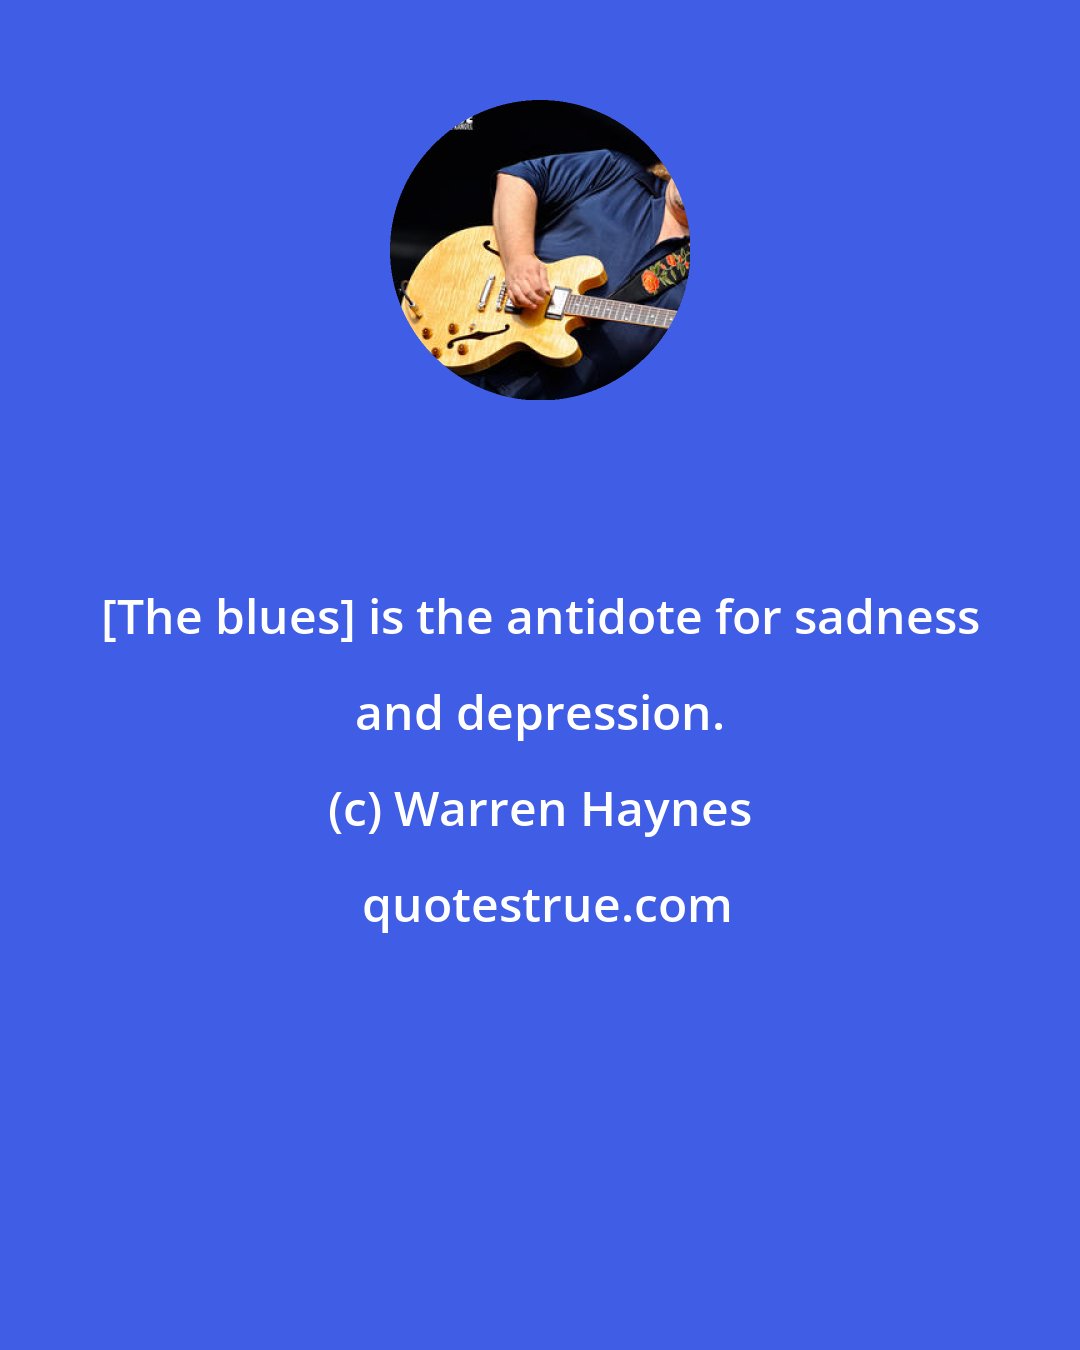 Warren Haynes: [The blues] is the antidote for sadness and depression.